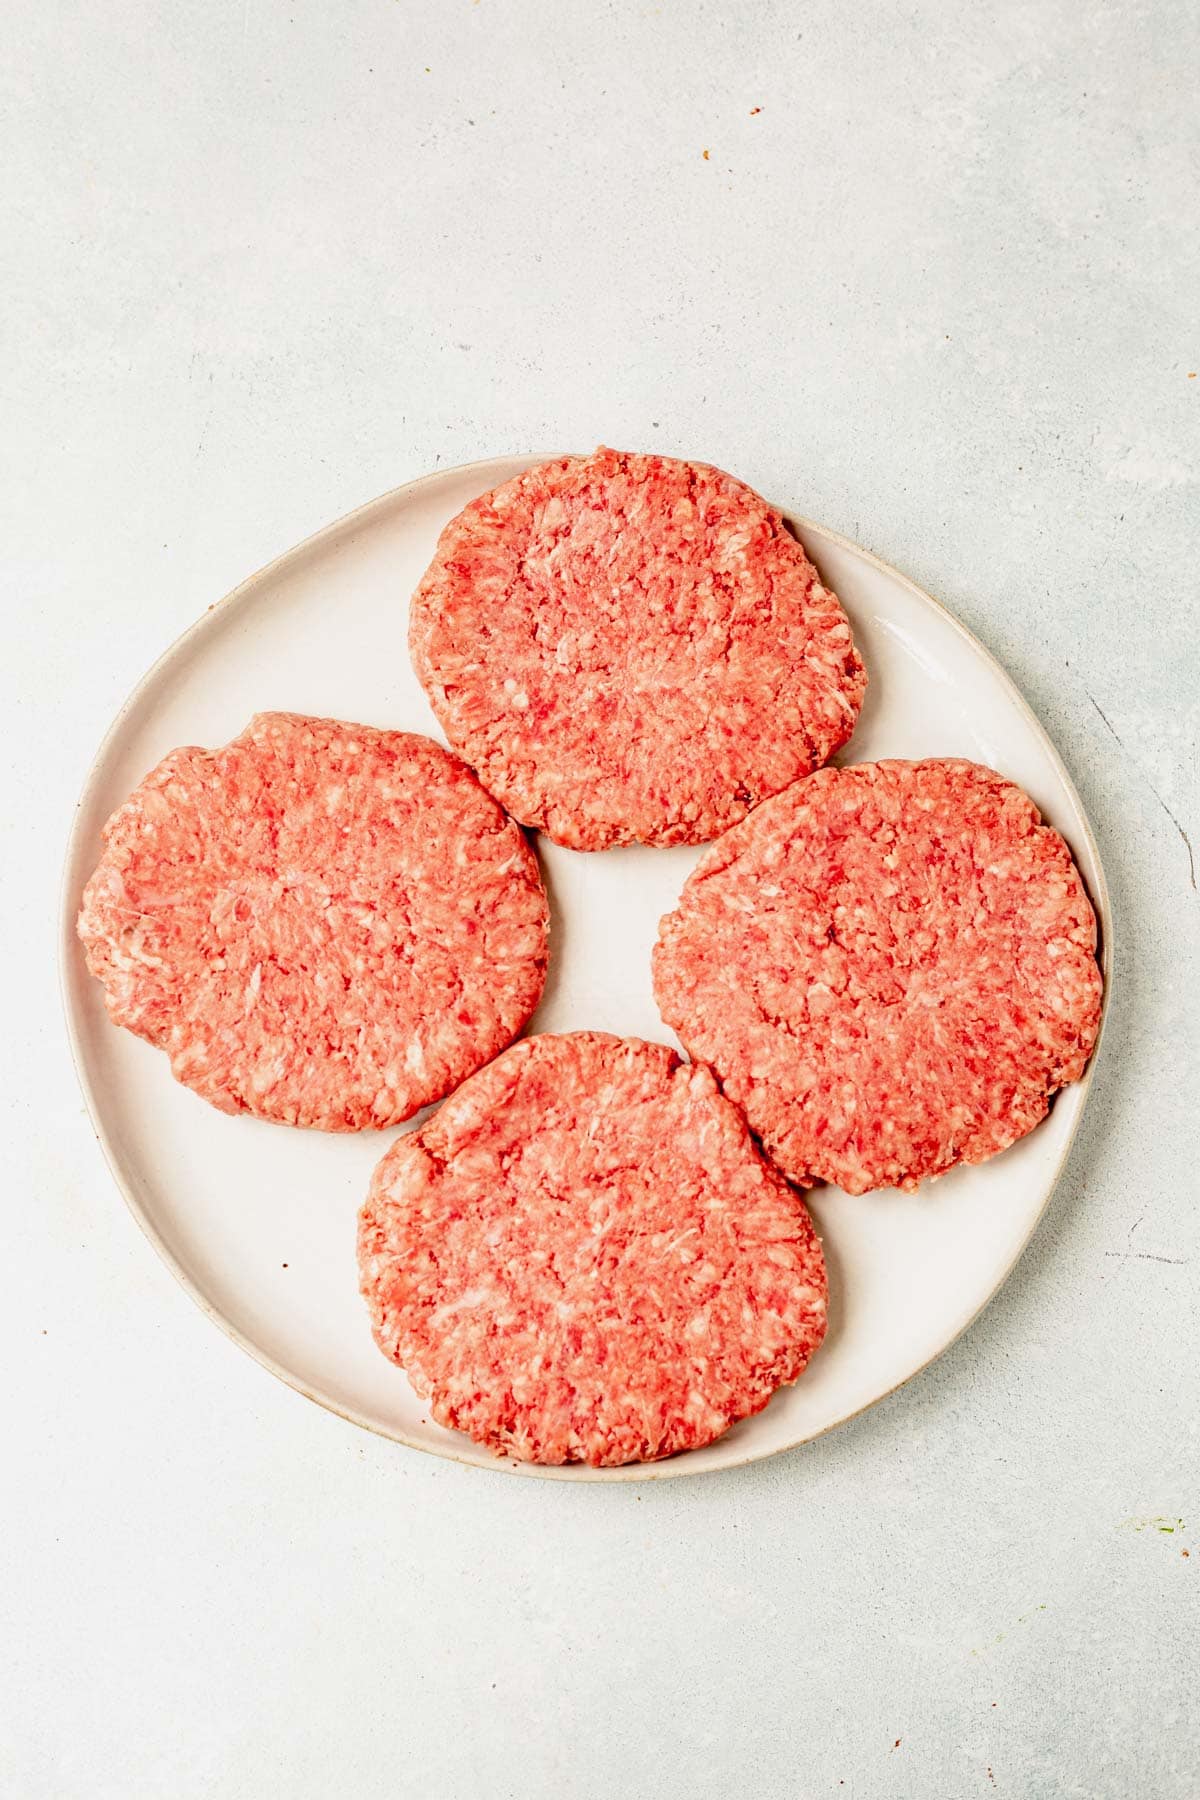 4 raw burger patties on a plate